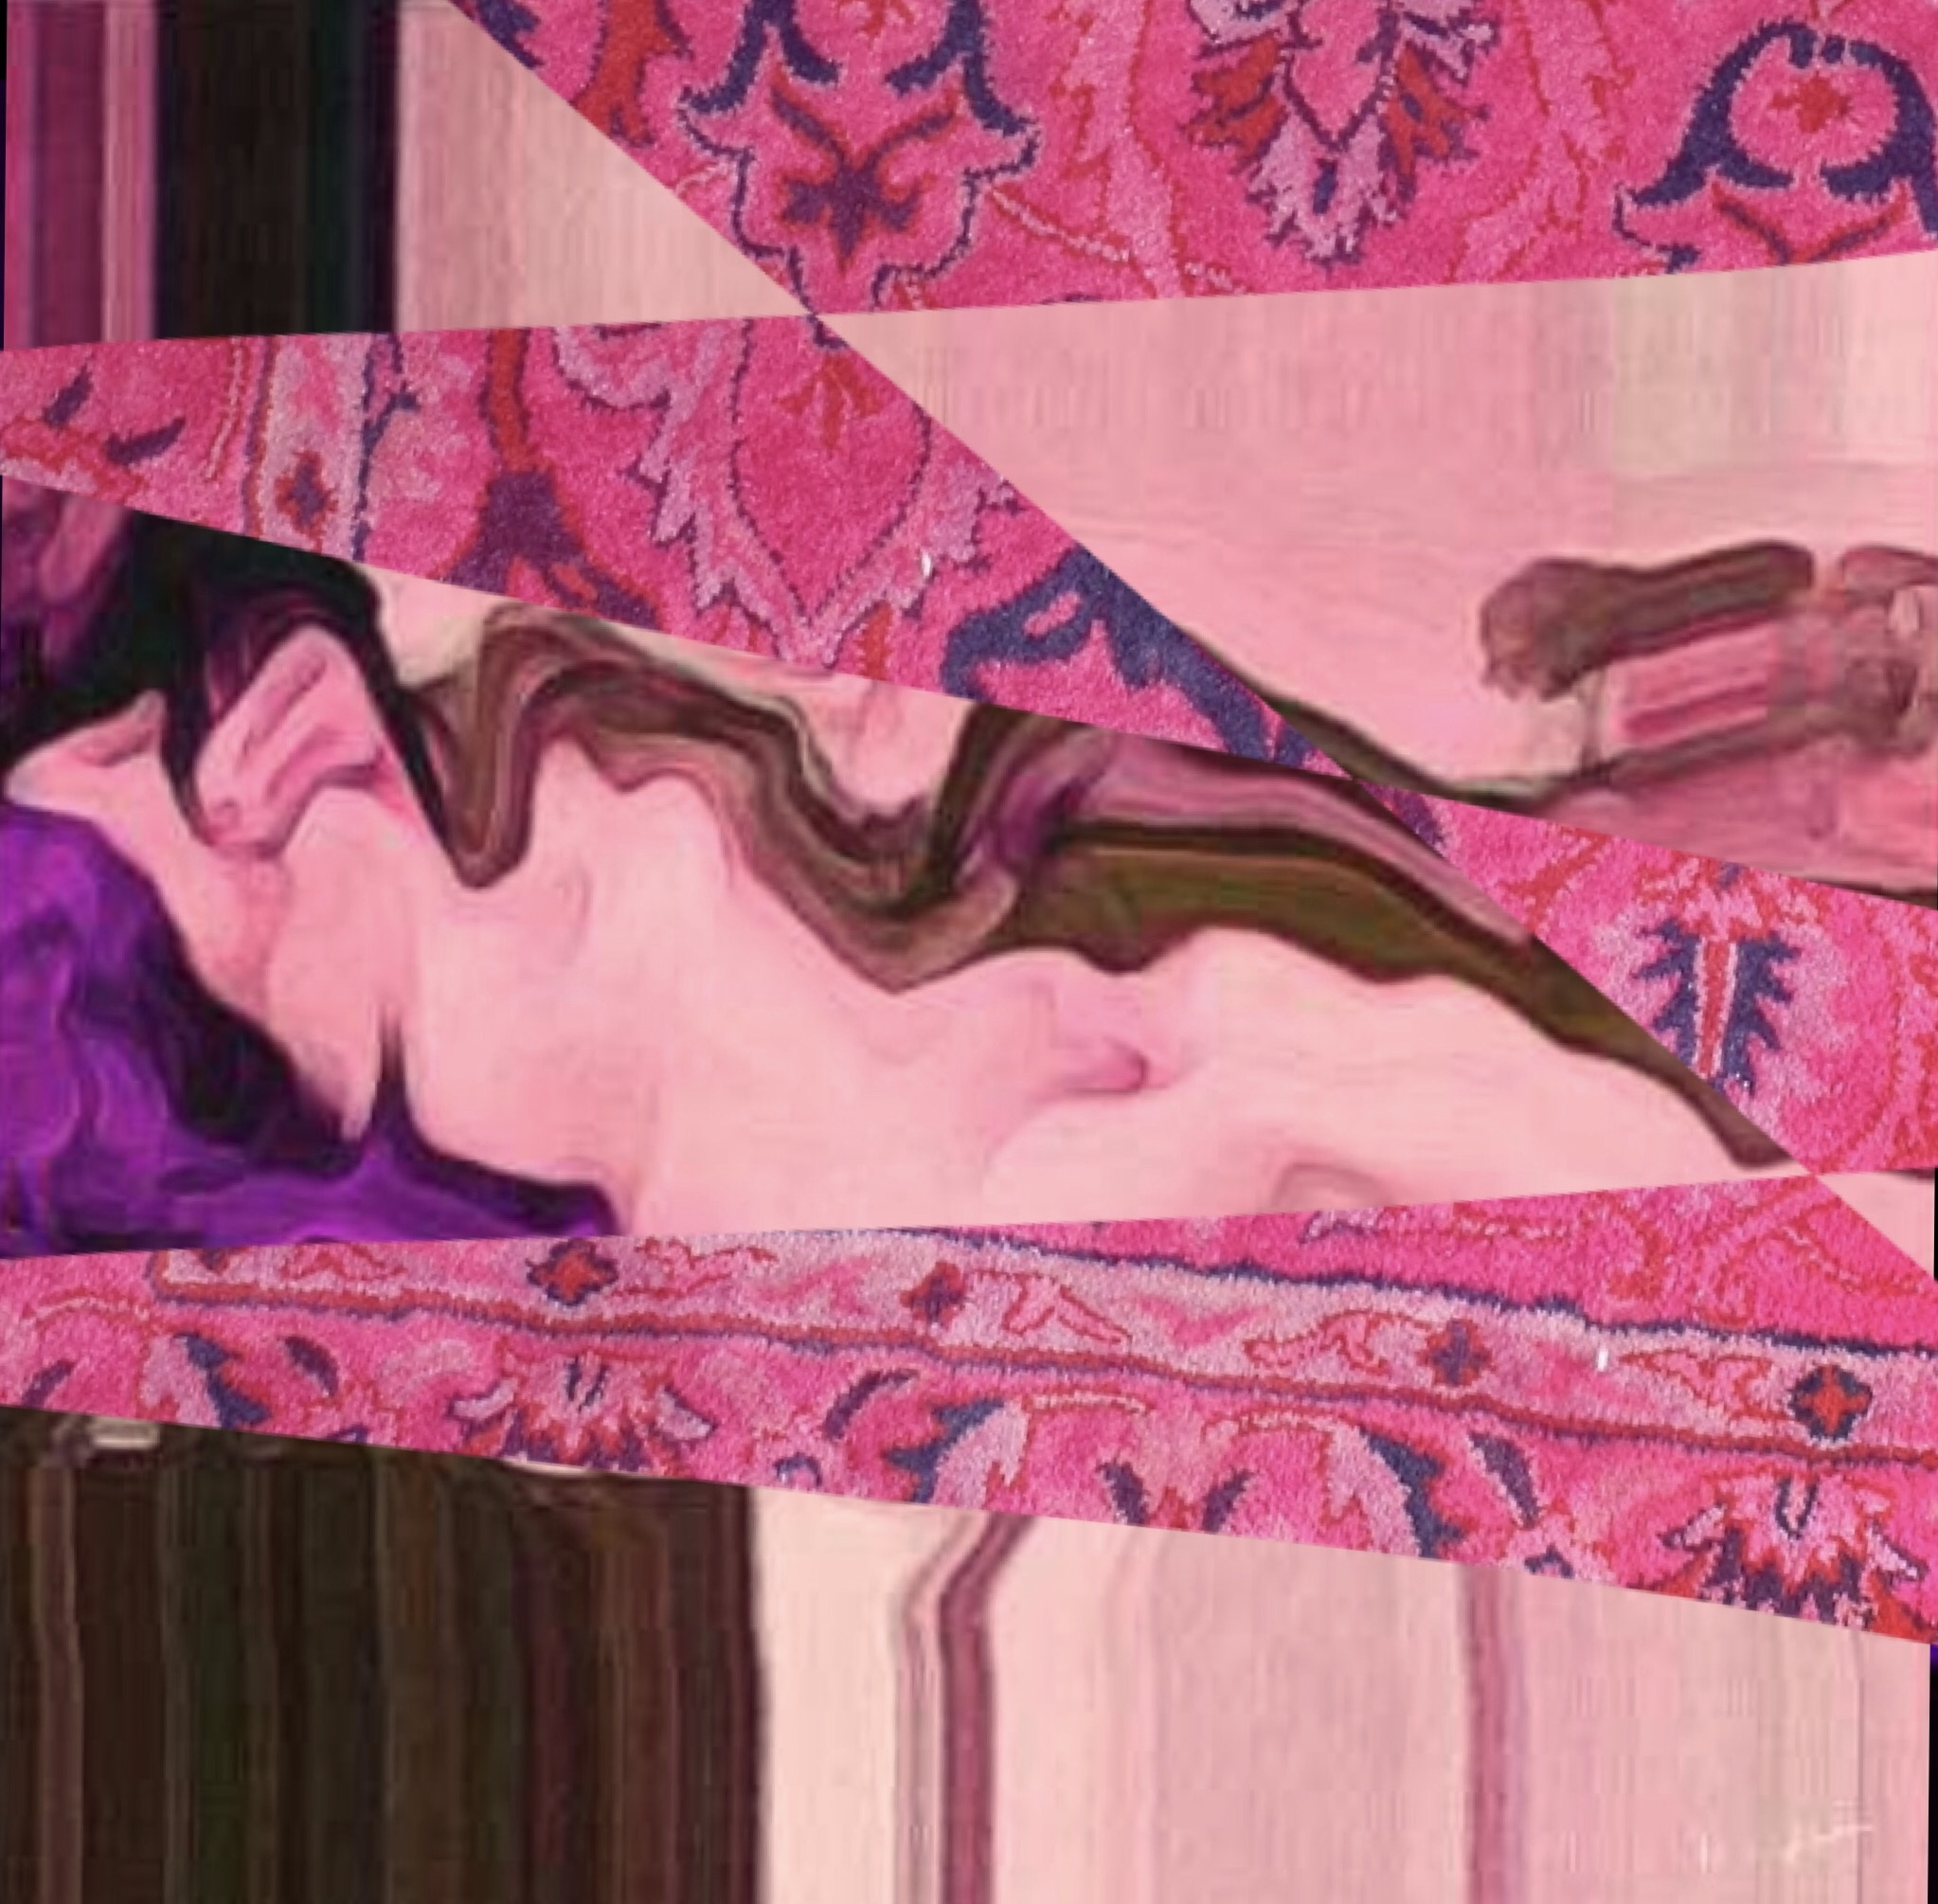  Odalisque with Persian Rug 36x24 inch 2017 